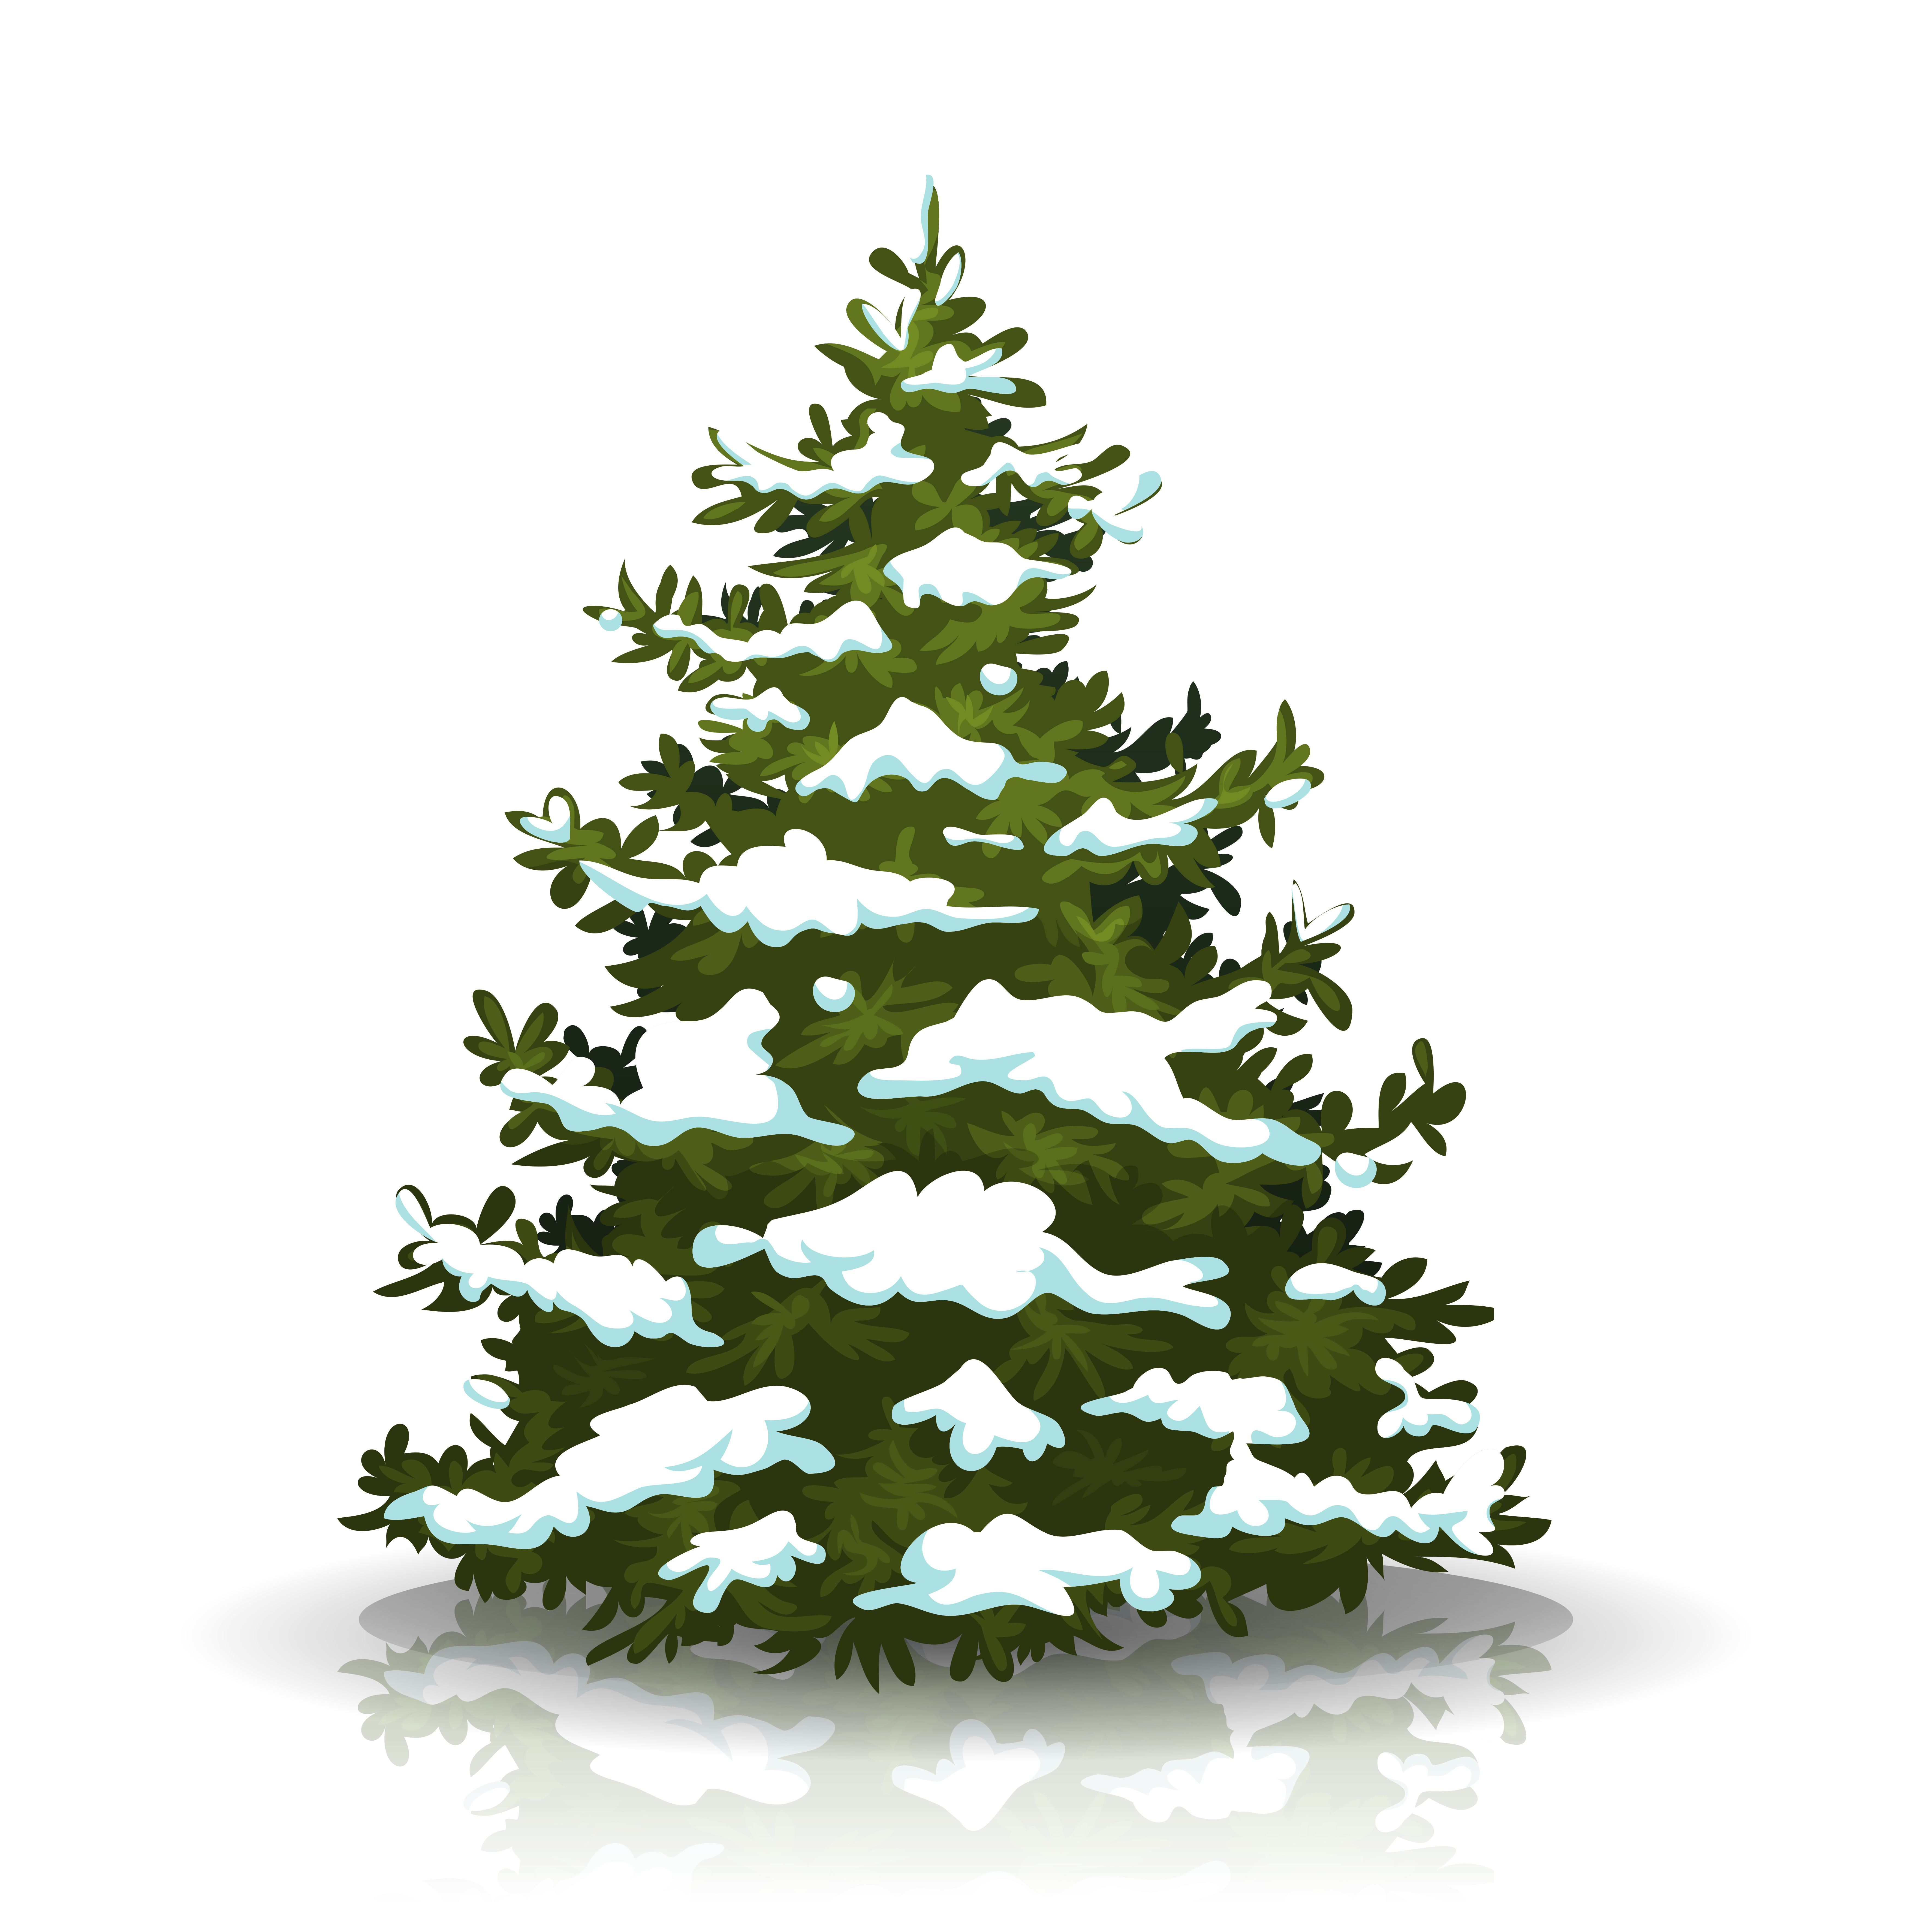 Christmas Pine Tree With Snow - Download Free Vectors ...
